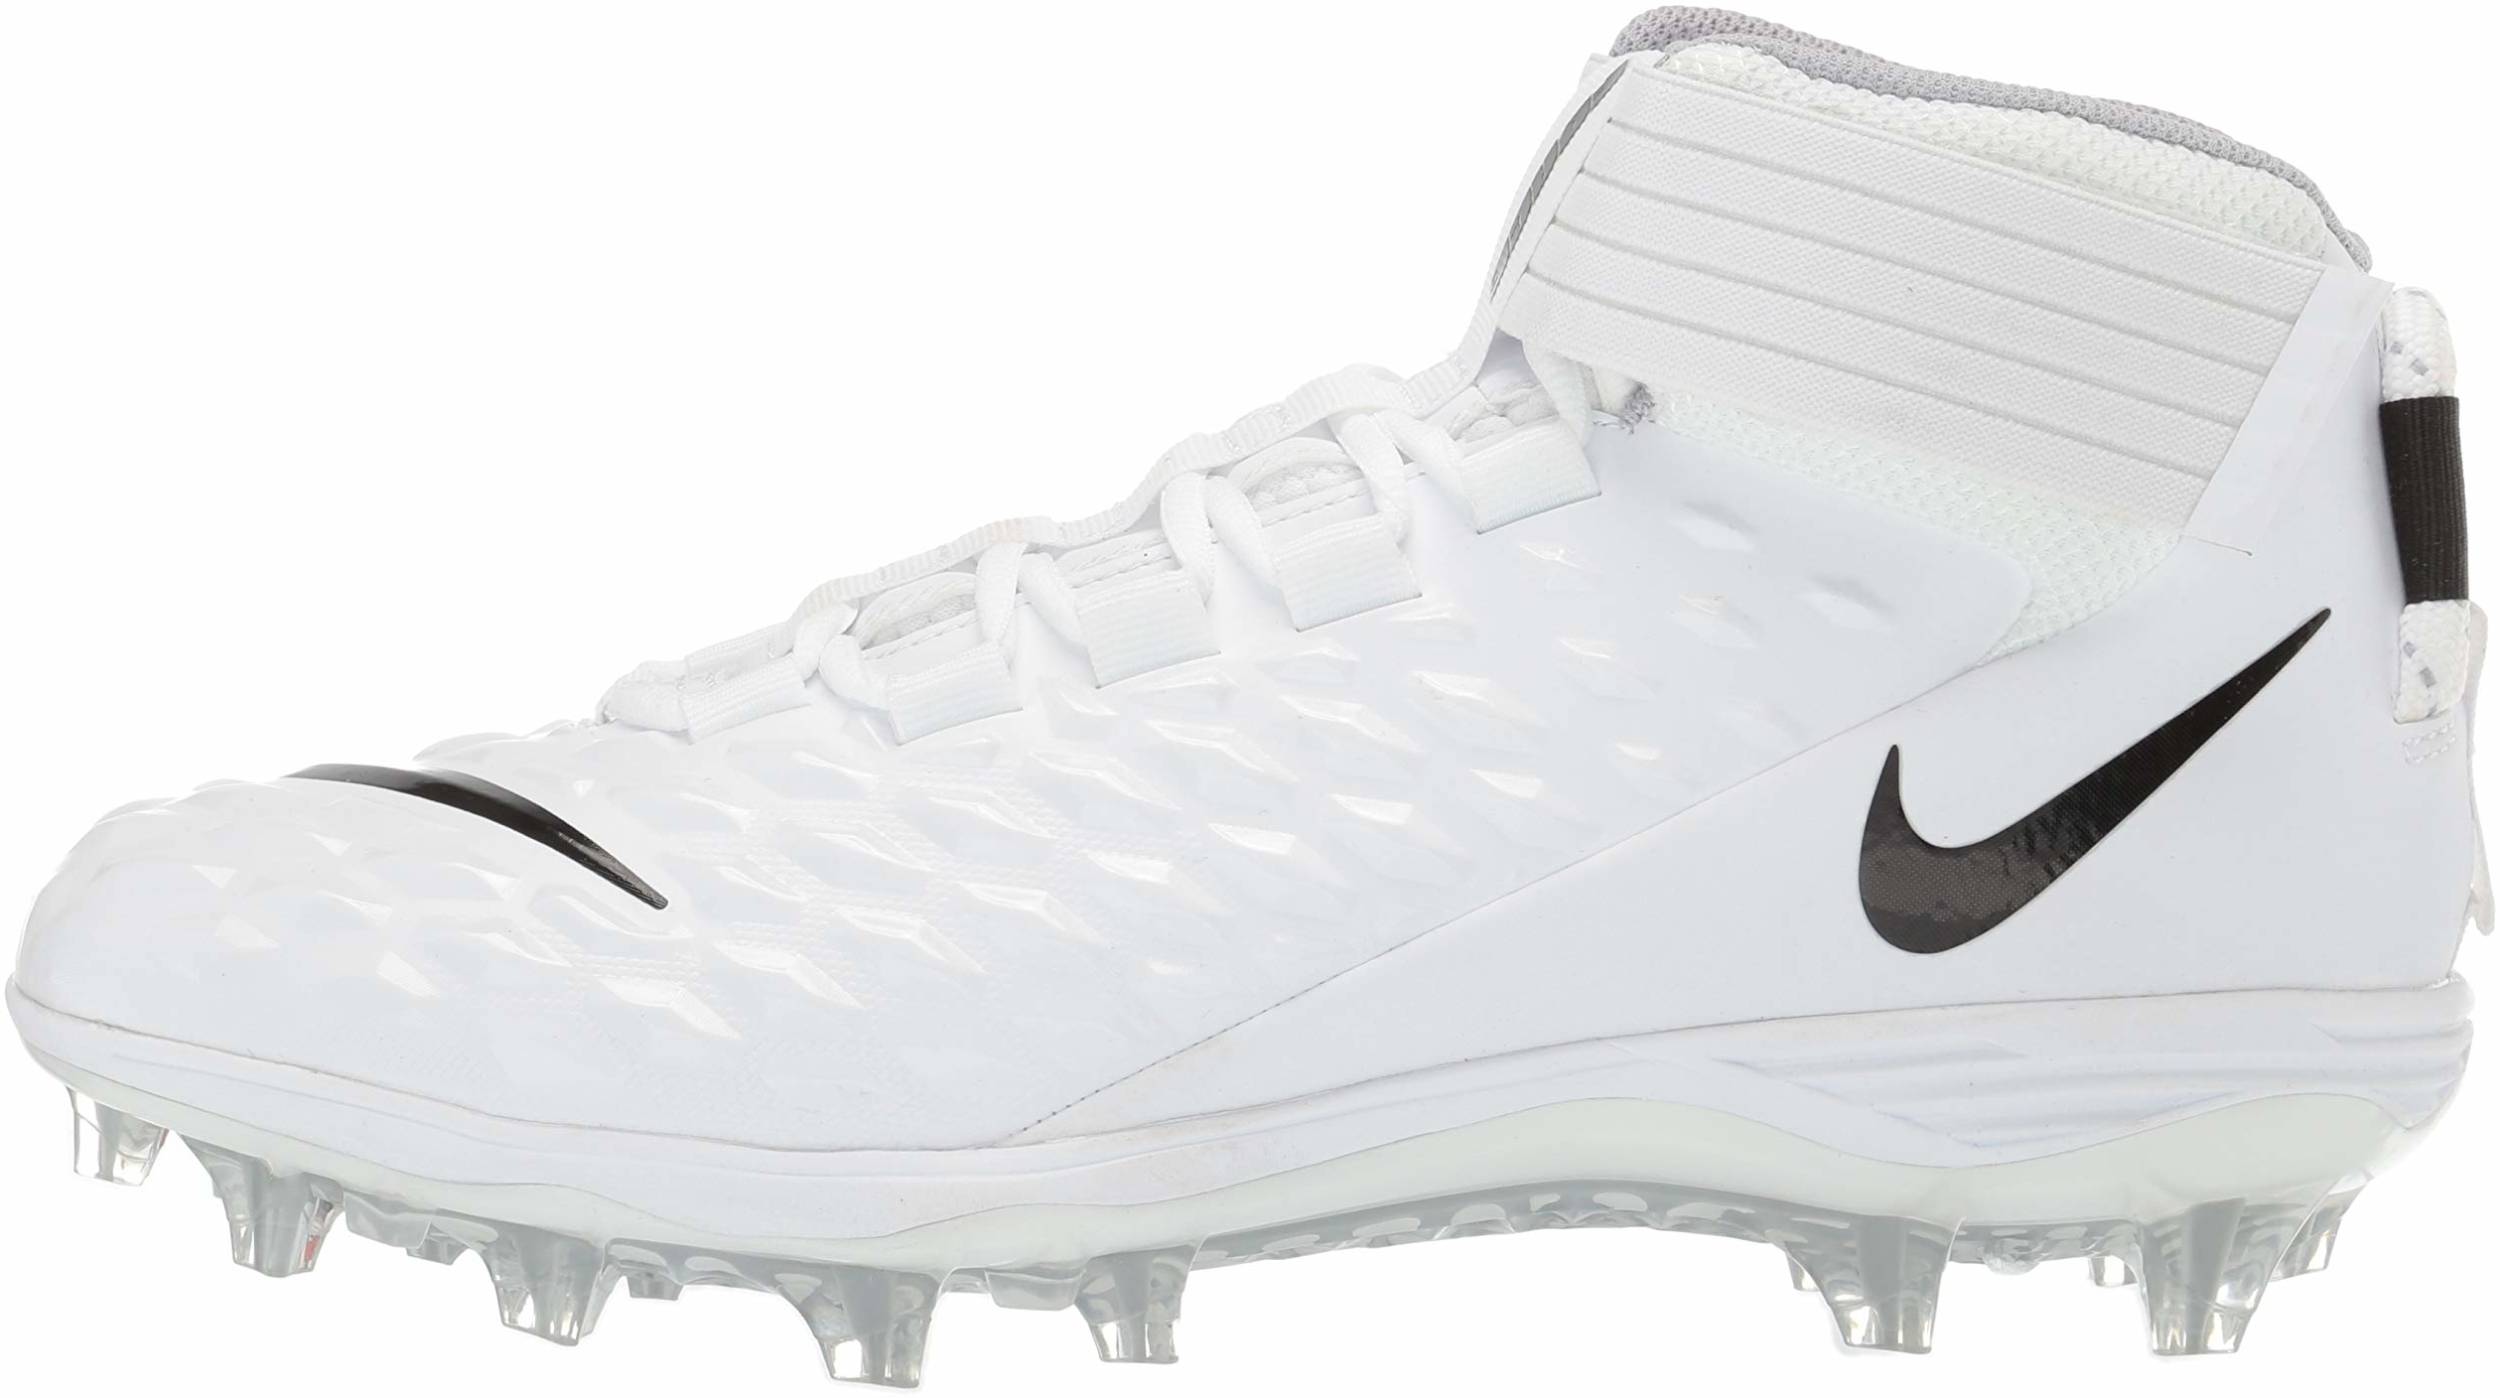 Save 59% on White Football Cleats (23 